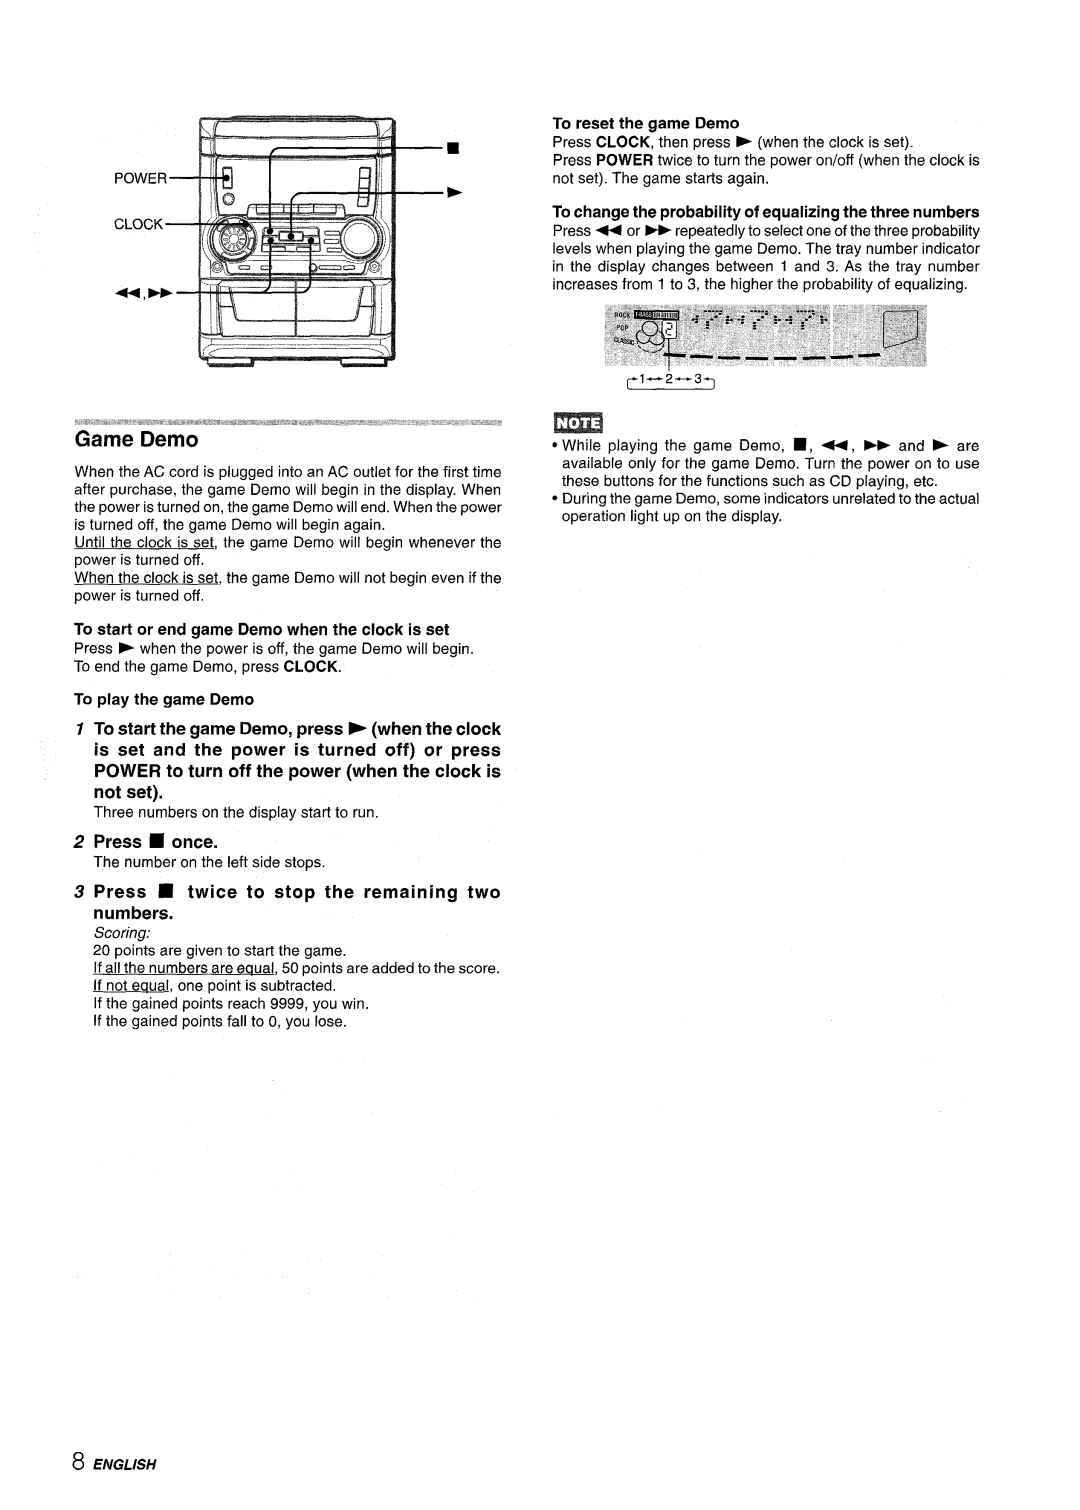 Aiwa SX-C605 manual To start the game Demo, press ~ when the clock, POWER to turn off the power when the clock is not set 